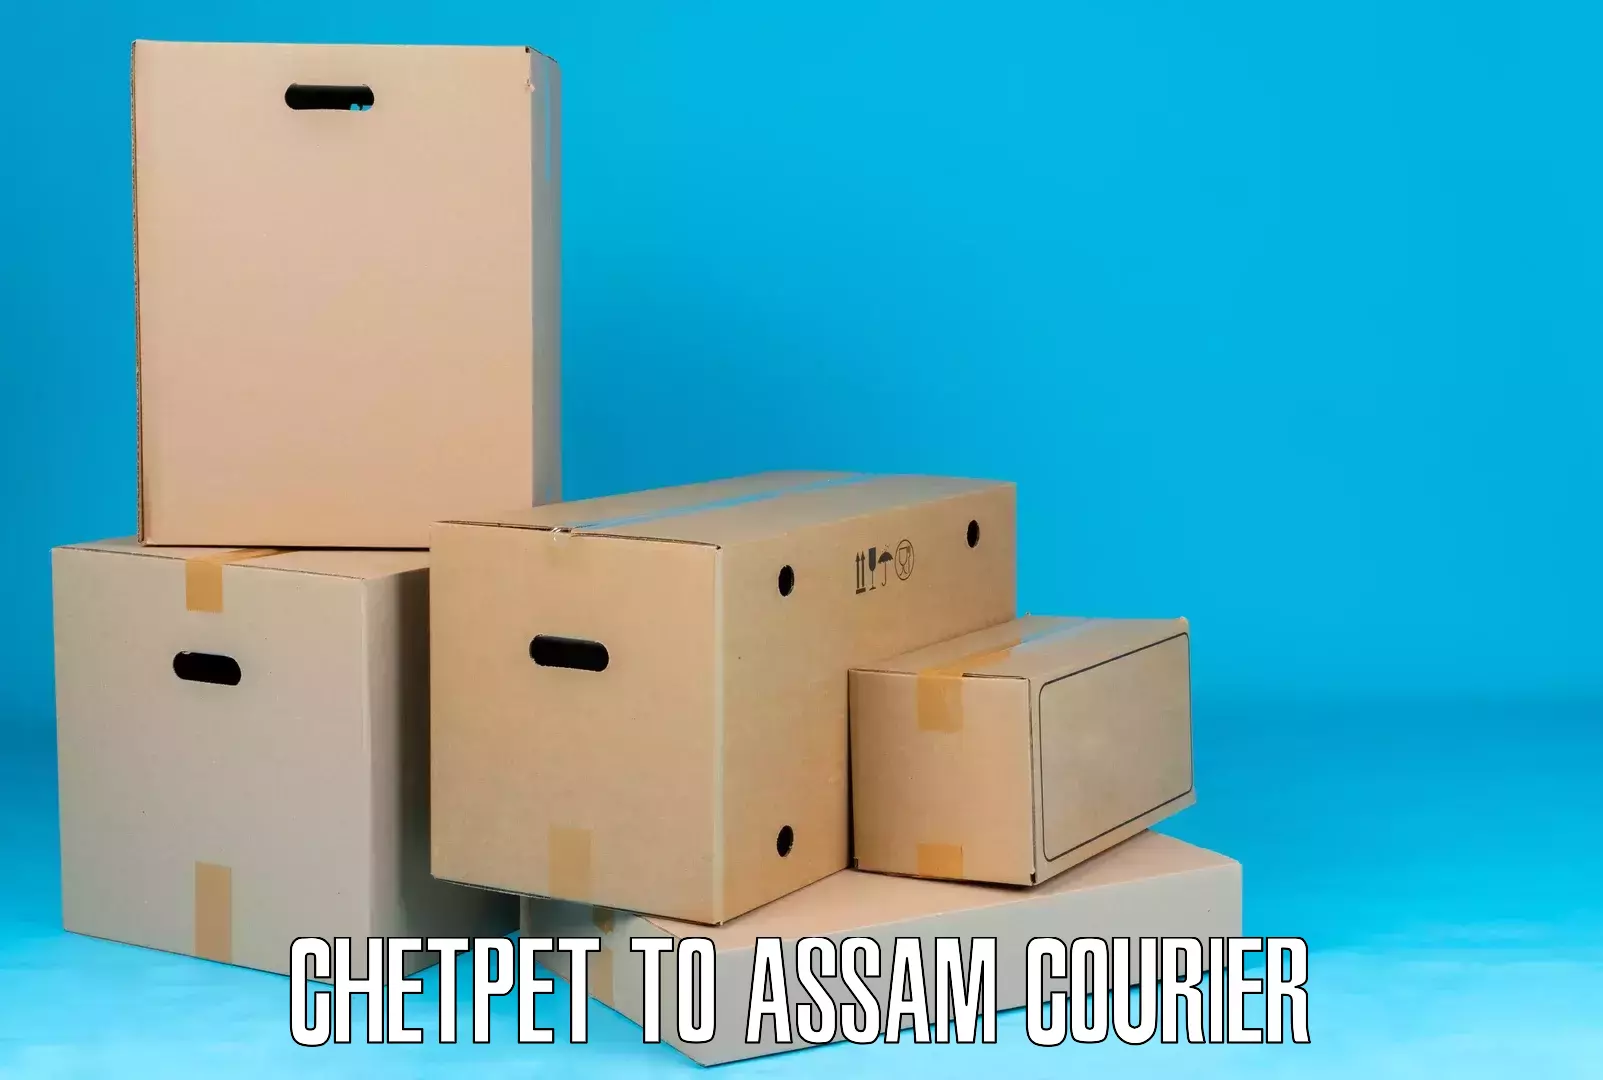 Nationwide shipping capabilities in Chetpet to Golaghat